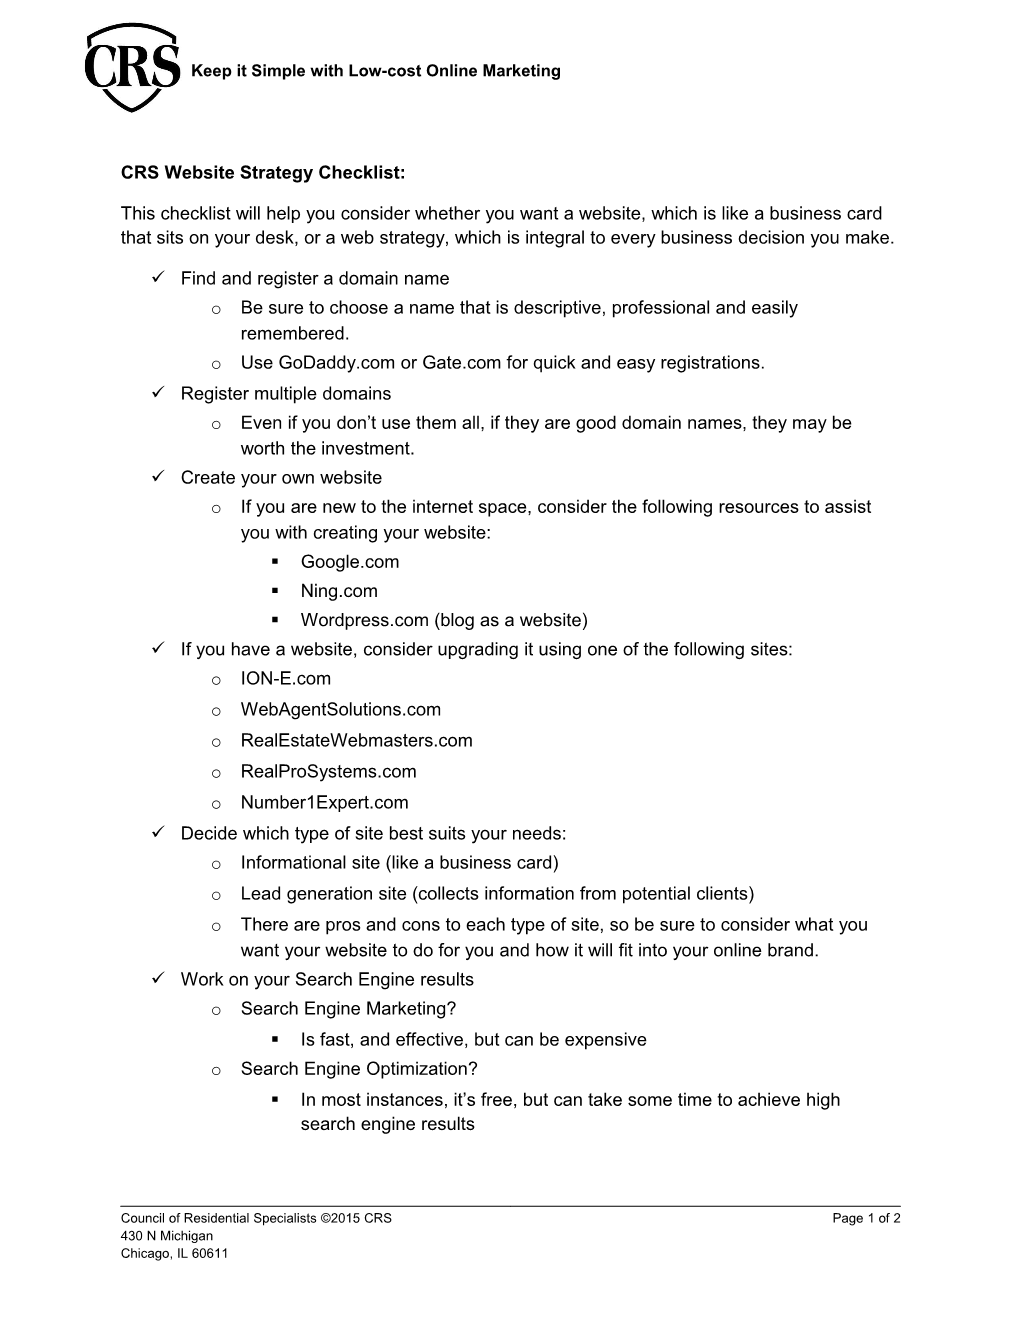 CRS Website Strategy Checklist